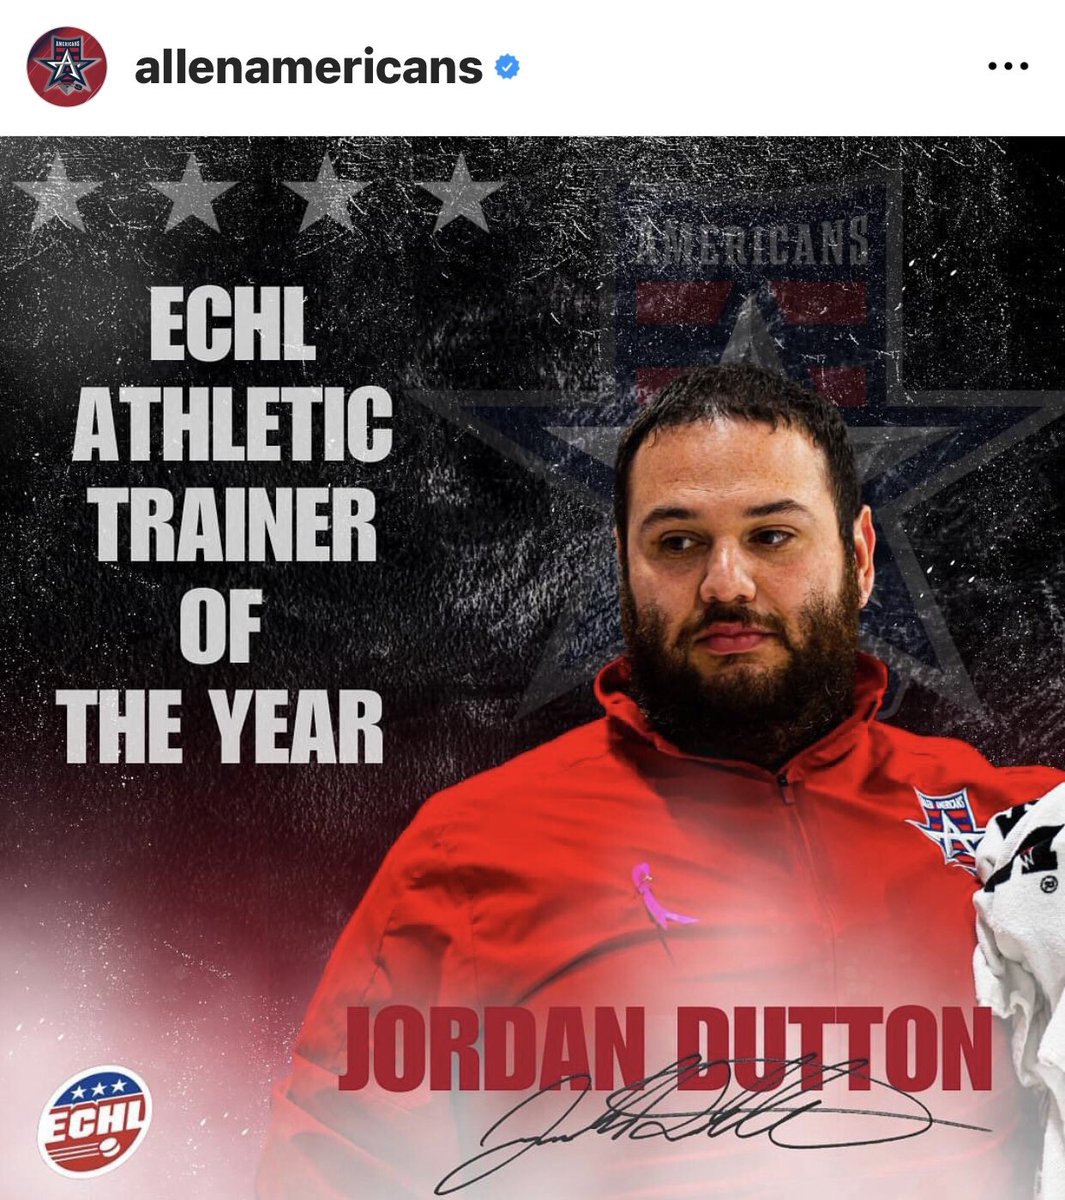 HAPPY BIRTHDAY TO MY MAN, THE MYTH, THE LEGEND - Jordan Dutton 🎉🤩🎊🤘🏼@ECHL 
Trainer of the Year!! @jdutton44 
Brought to you by @orthotexas 
Without him the @AllenAmericans 
are just another hockey team! 
#liveinthered🇺🇸 #DriveforFive